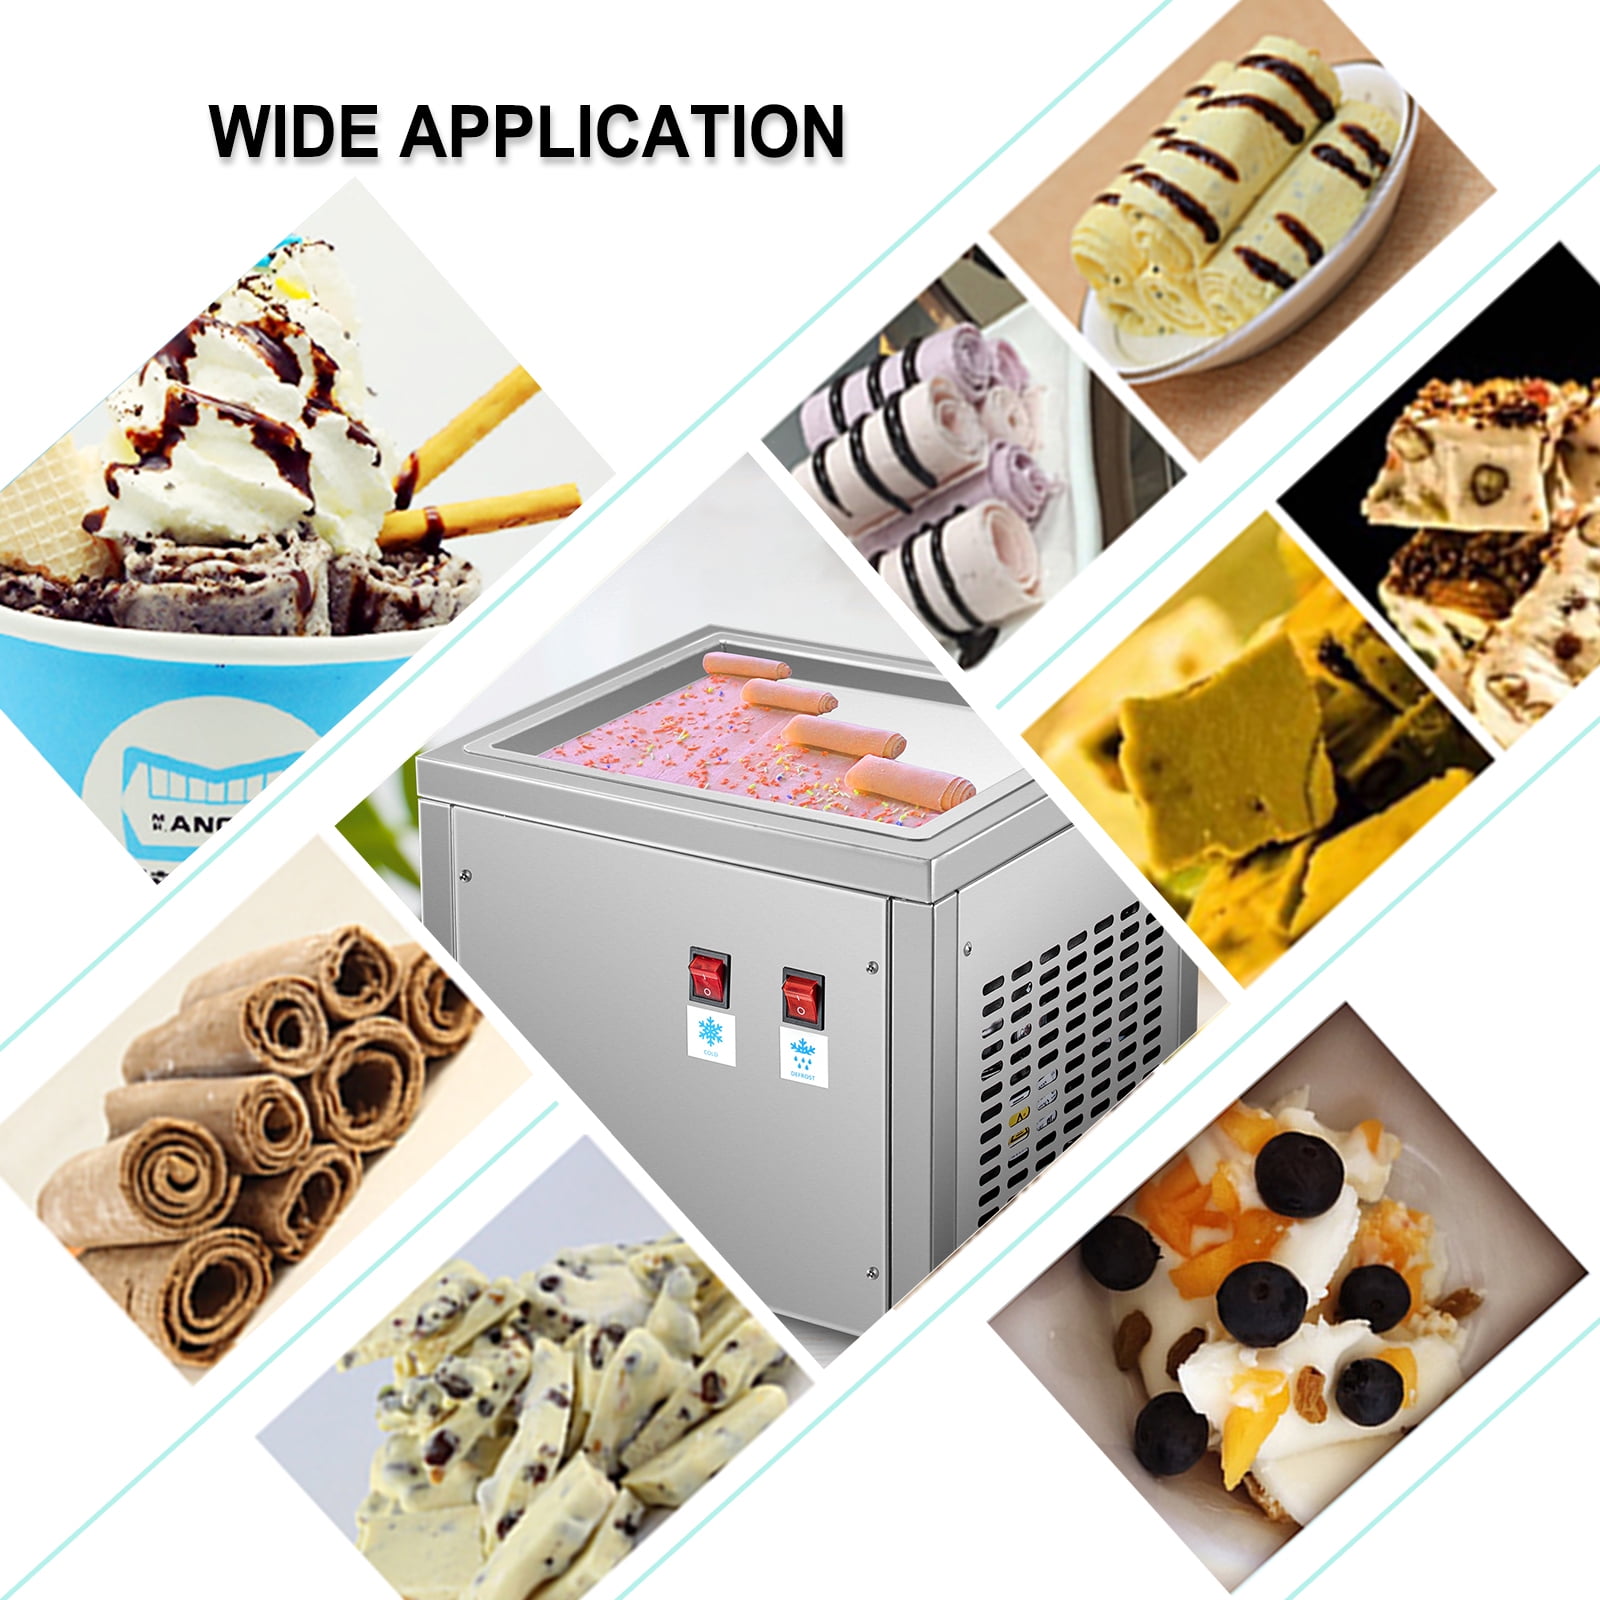 Commercial Rolled Ice Cream Machine, Stir-Fried Ice Roll Machine Single  Pan, Stainless Steel Ice Cream Roll Maker Refrigerated Cabinet 6 Boxes,  Roll Ice Cream Machine for Bar Caf‚ Dessert Shop